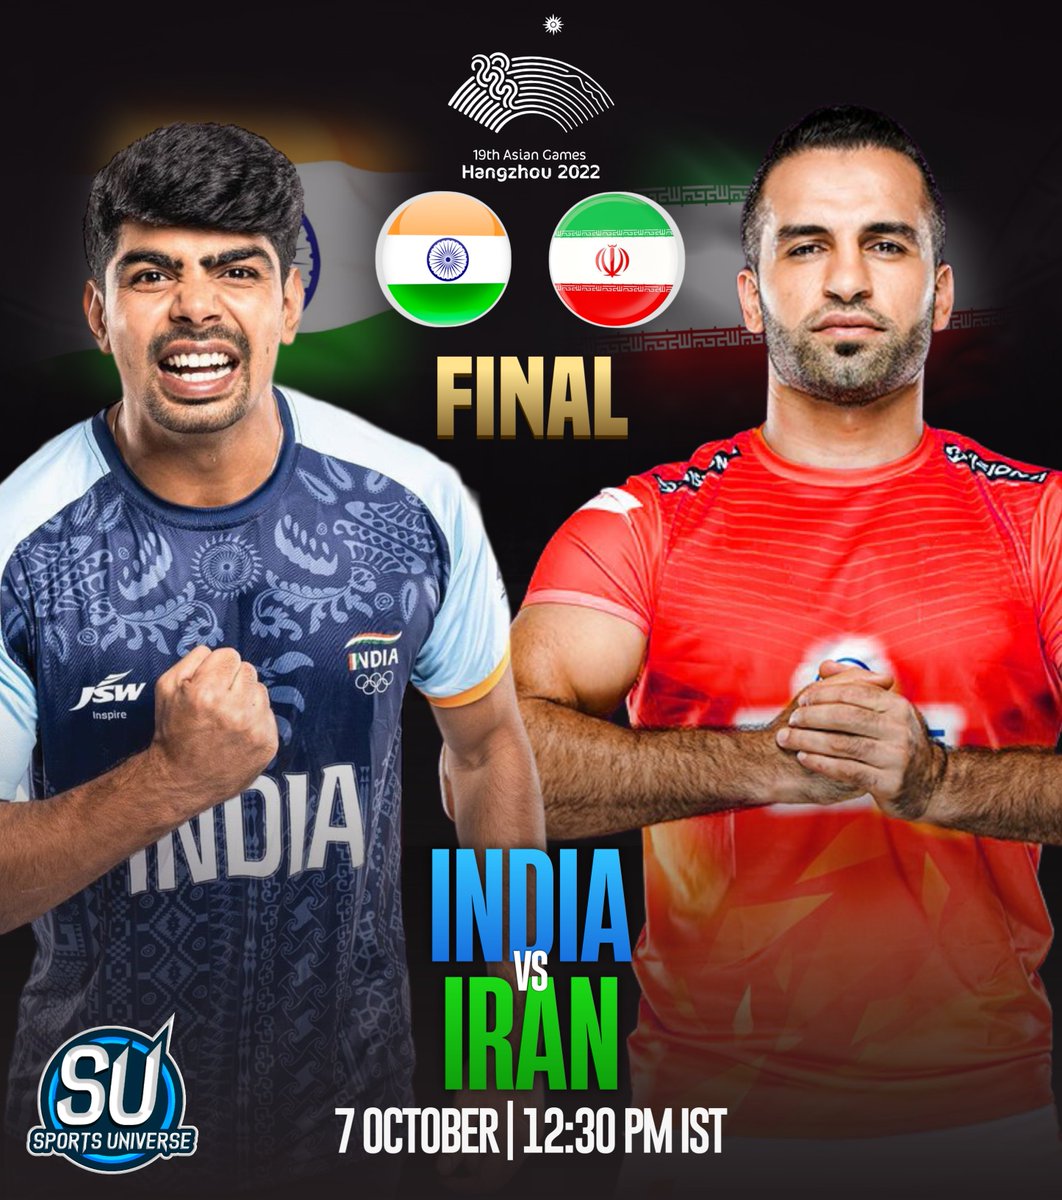 India vs Iran final in the 19th Asian Games! 🏆

- It's time to seek revenge against Iran.
- It's time to get back the champions' tag in Asian Games Kabaddi.
.
.
.
#AsianGames #AsianGames2023 #TeamIndia #India #Kabaddi #IndiavsIran #IndianKabaddi #SportsUniverse